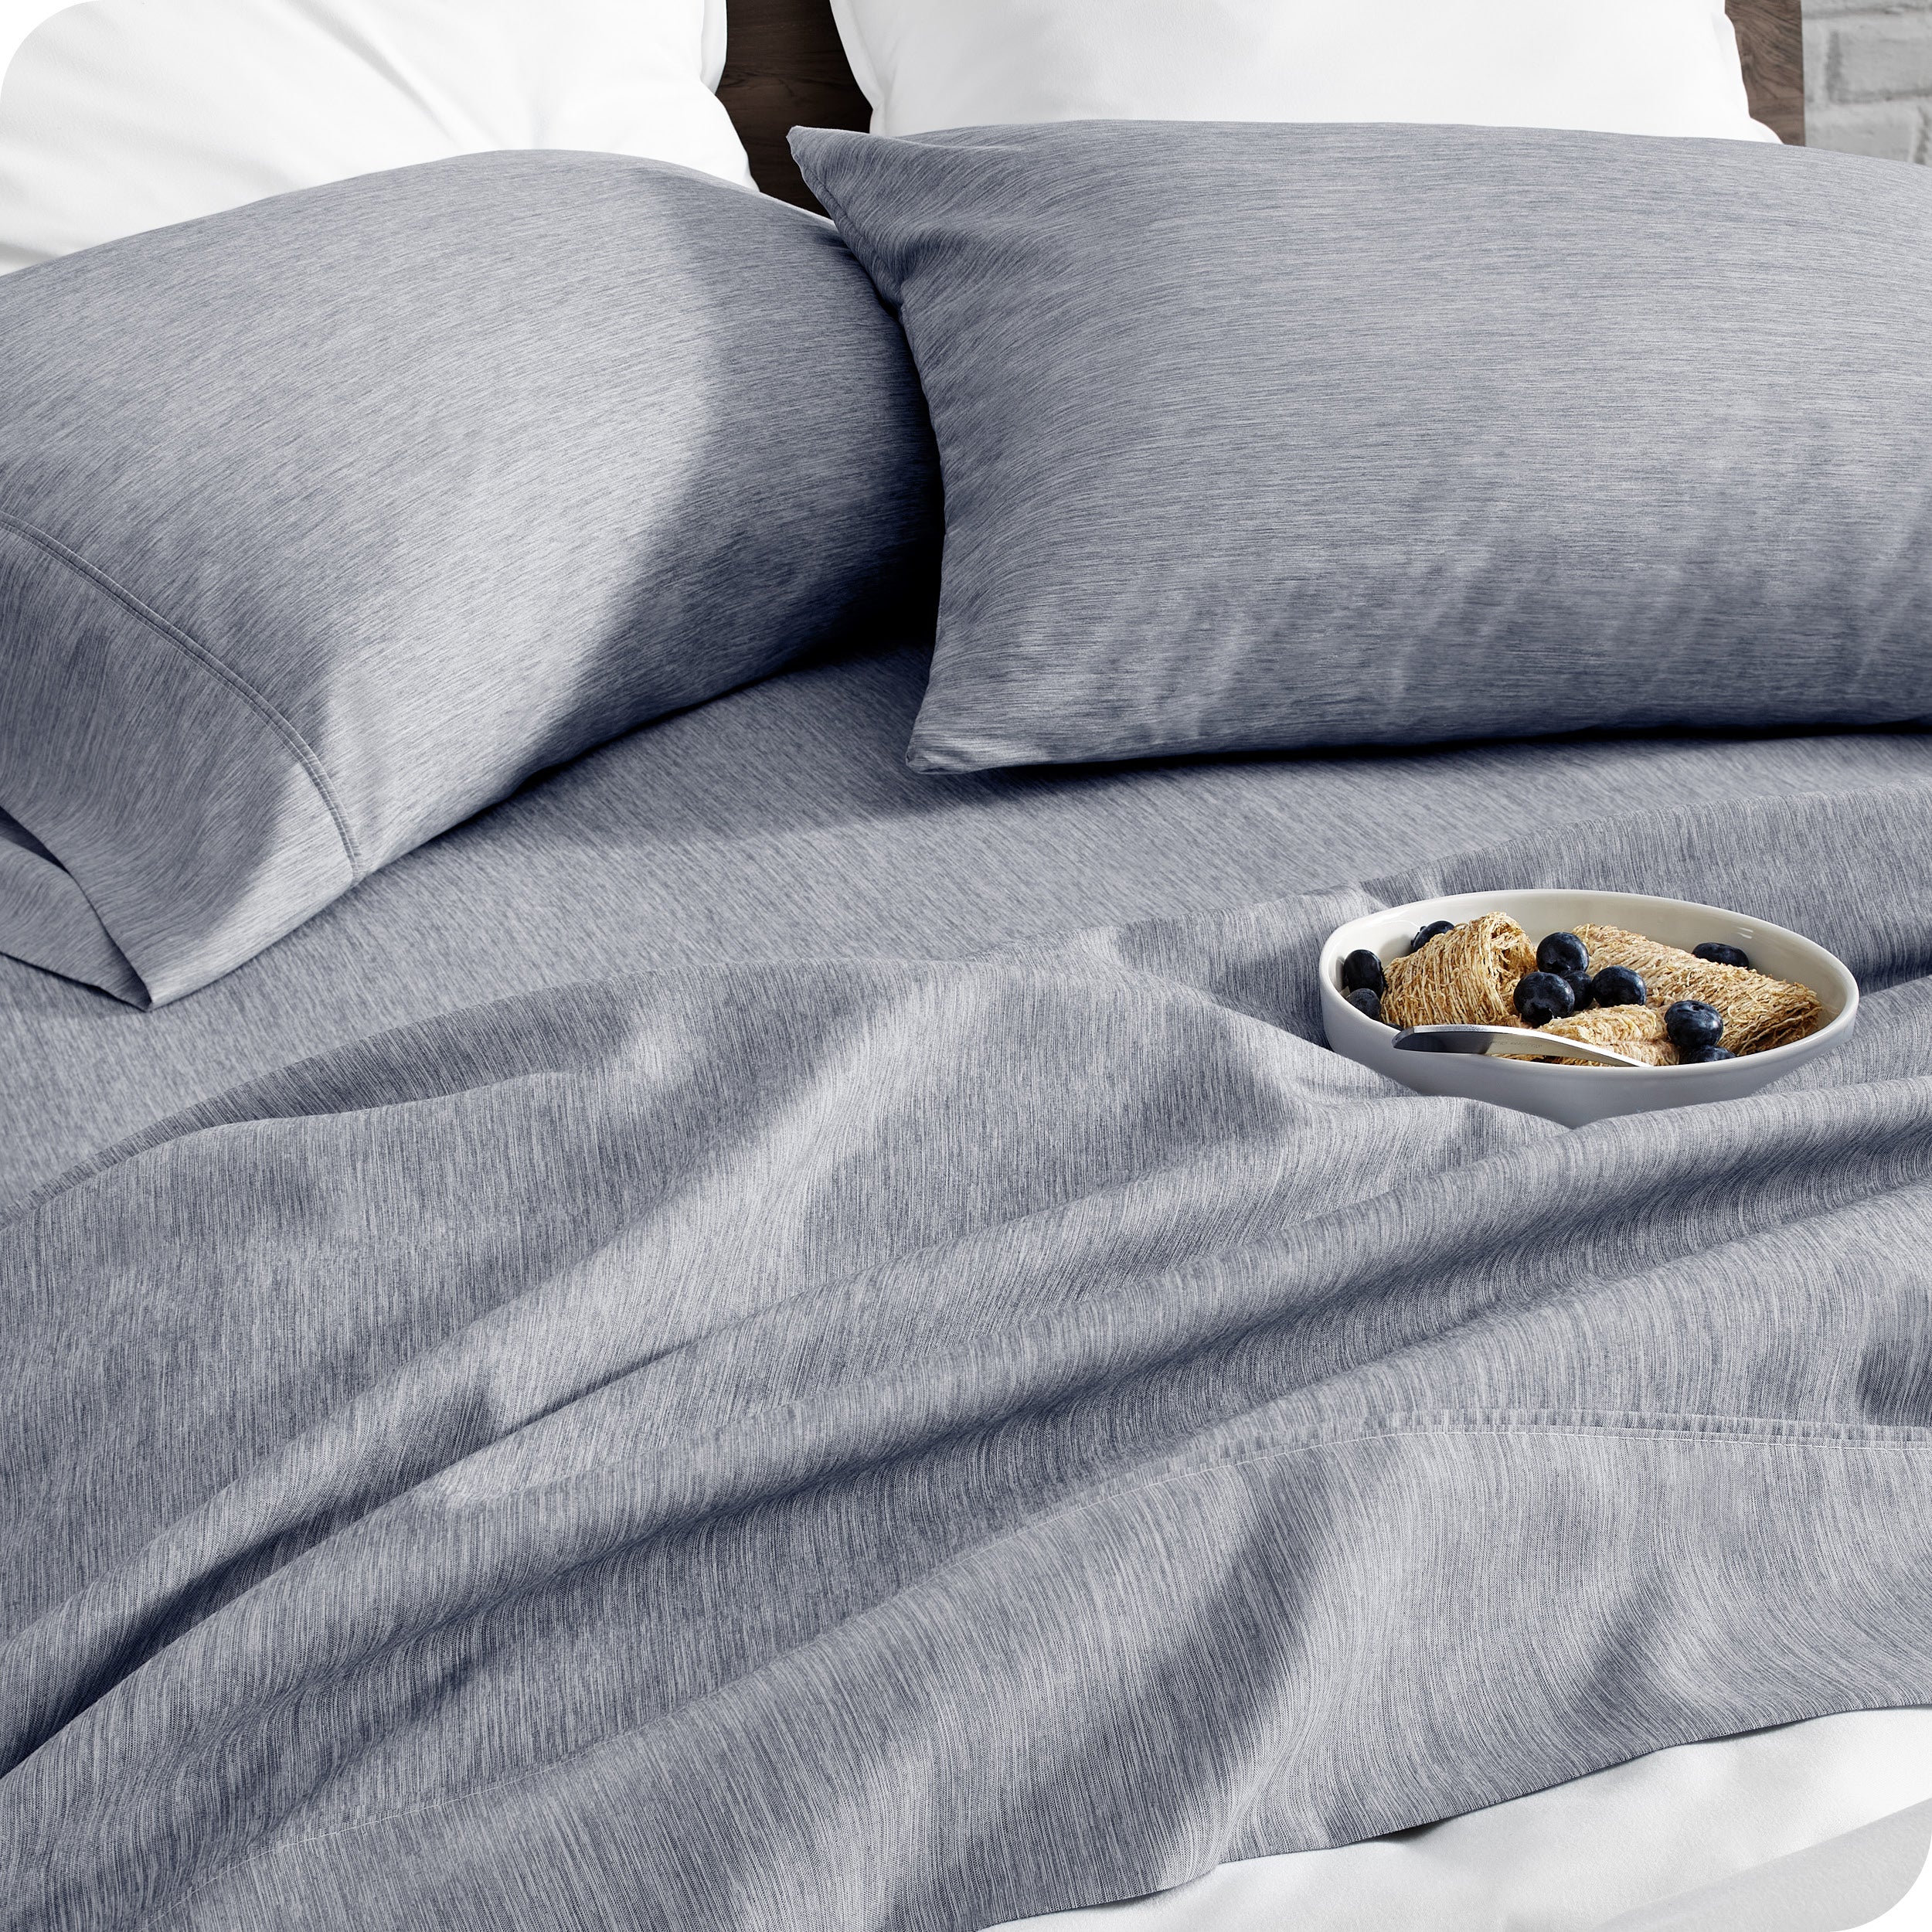 A bed made with sheets. A cereal bowl is on the sheets.